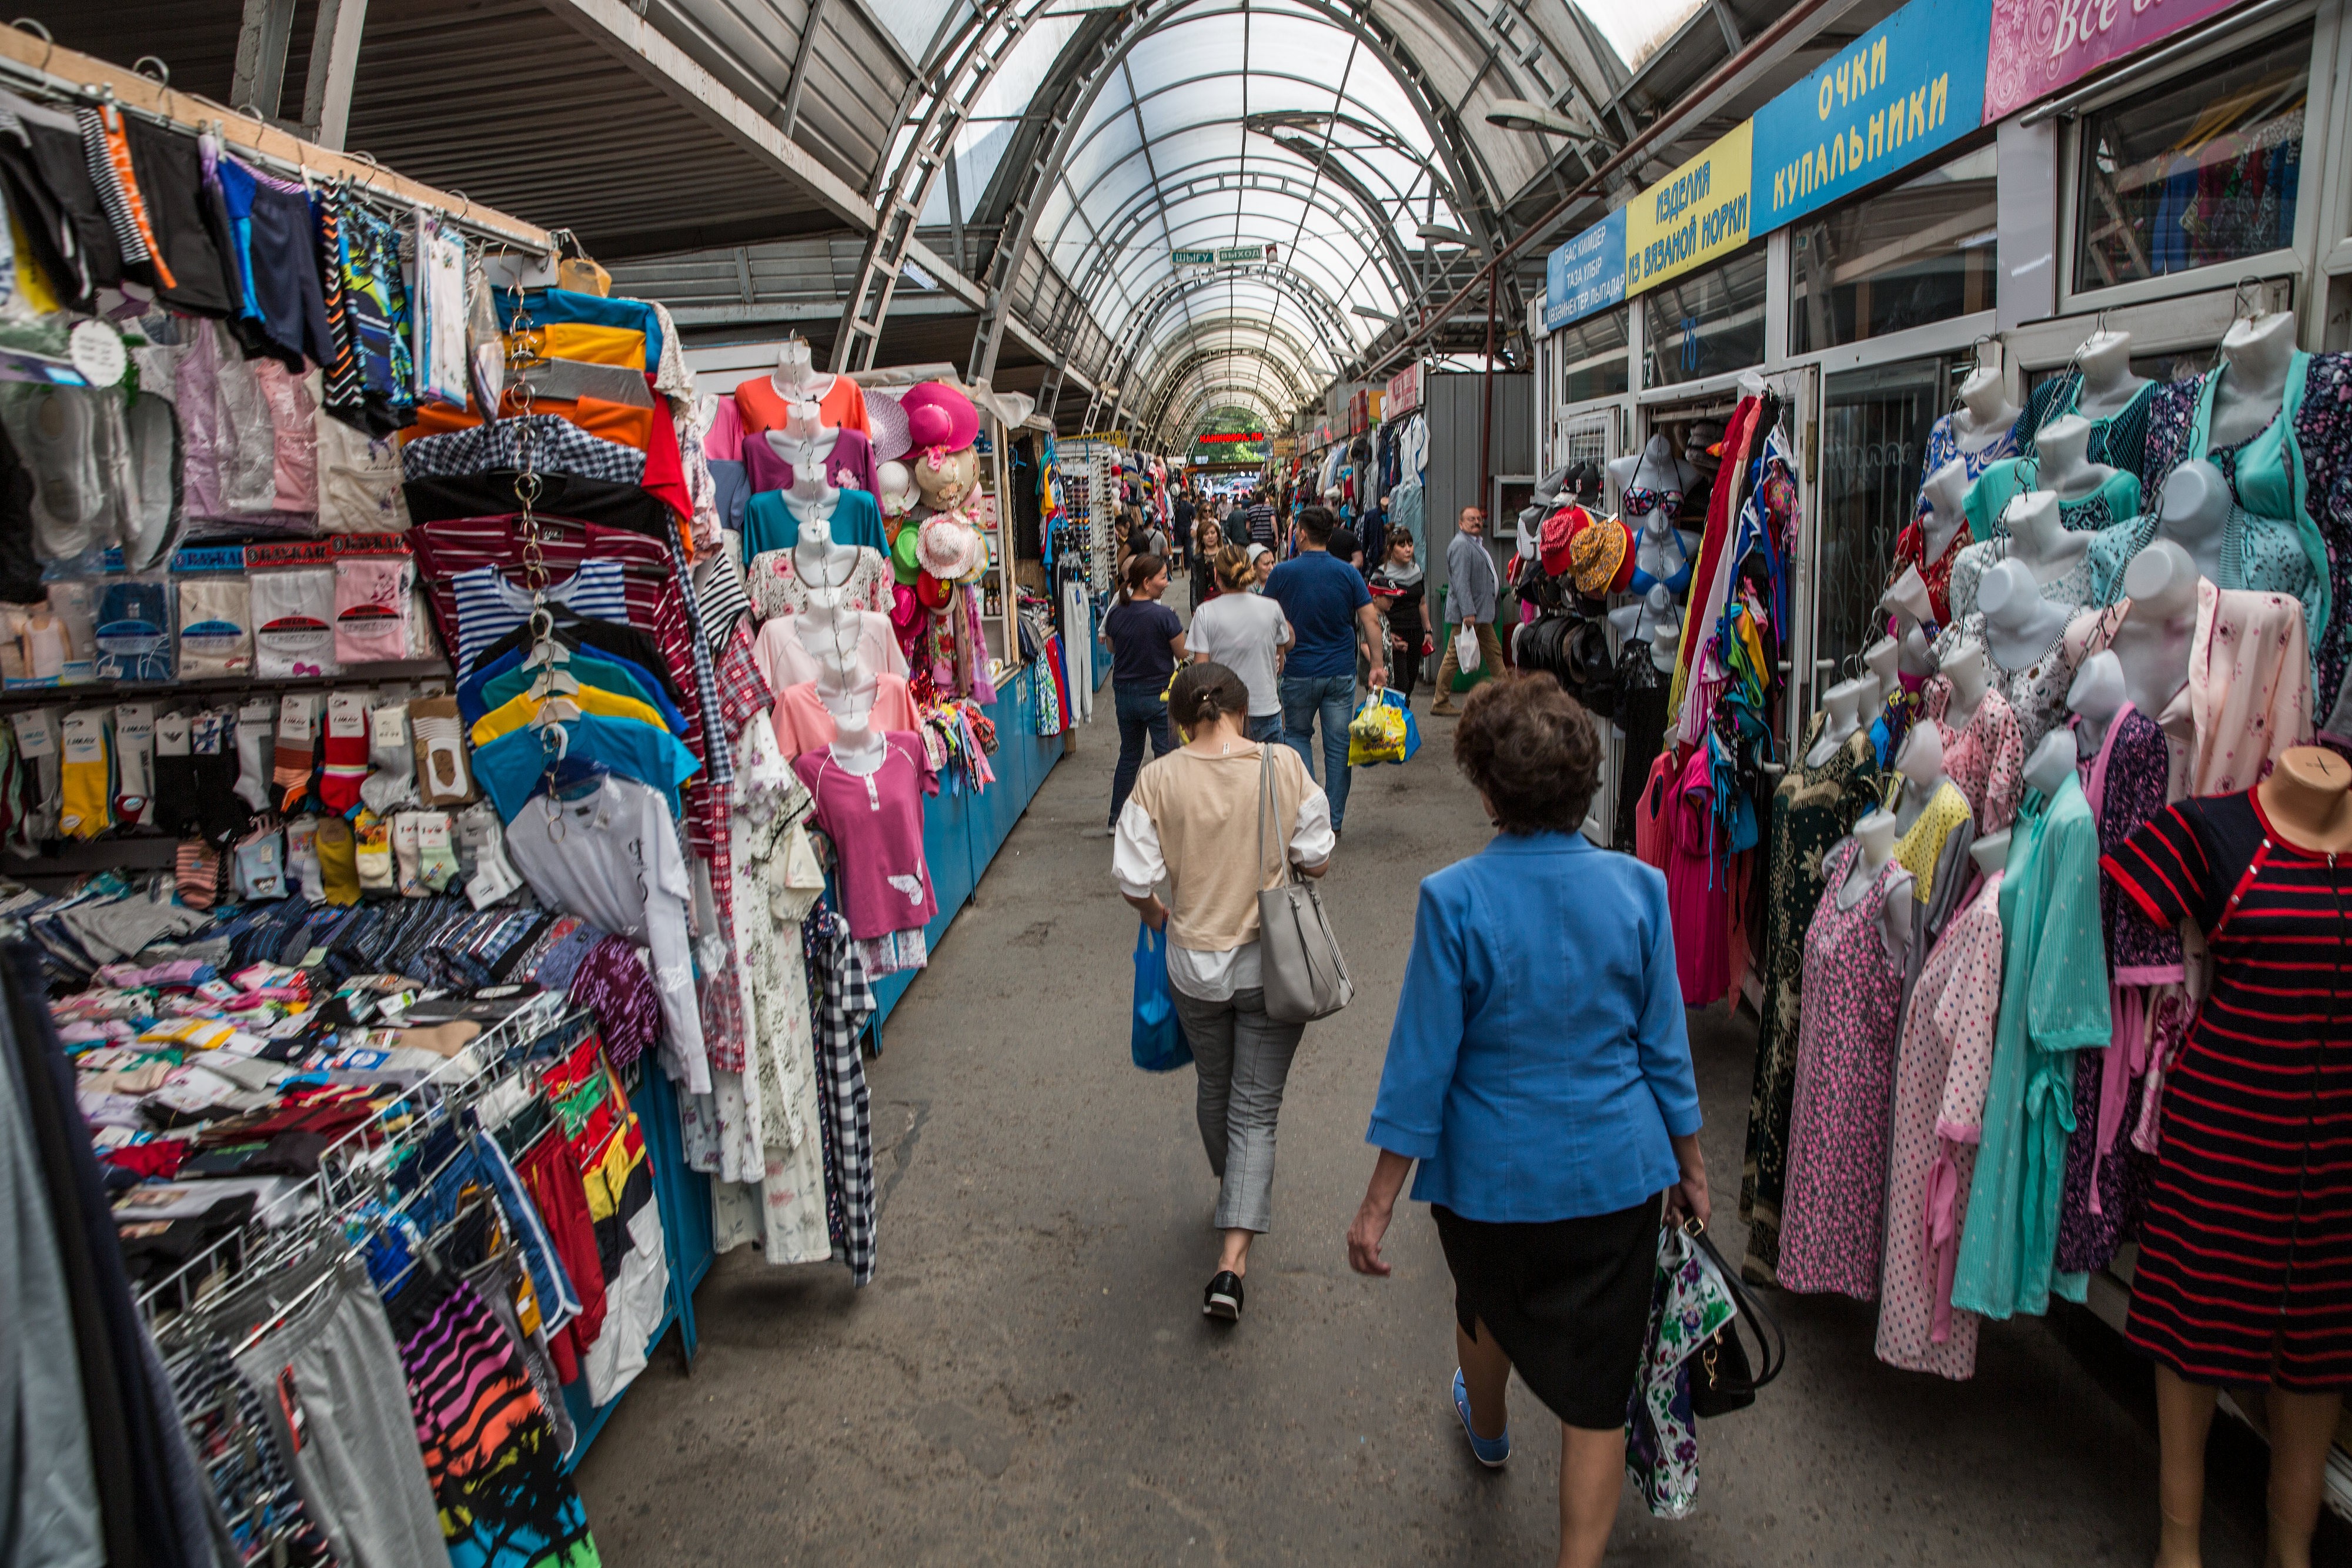 Shoppers walk past stalls near the Green Bazaar in Almaty, Kazakhstan, in April. An agreement between China and the Eurasian Economic Union will give Chinese companies an edge over their EU competitors in Central Asia. Photo: Bloomberg